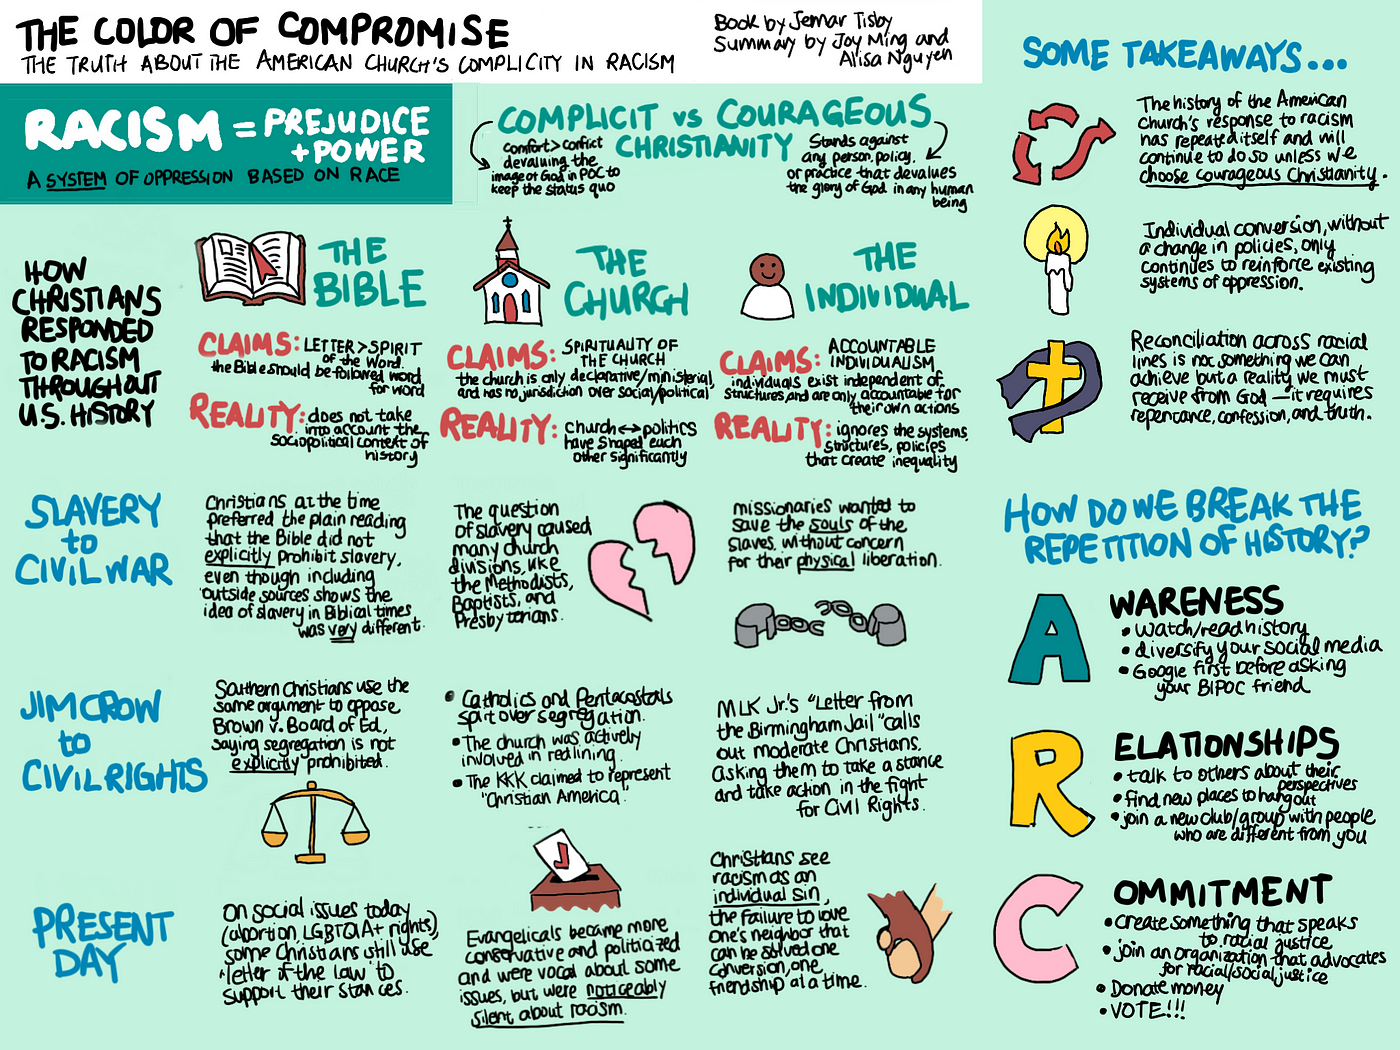 Visual summary of the history and concepts presented by the book Color of Compromise. Please refer to the linked blogpost for a full transcription of the text in the image.